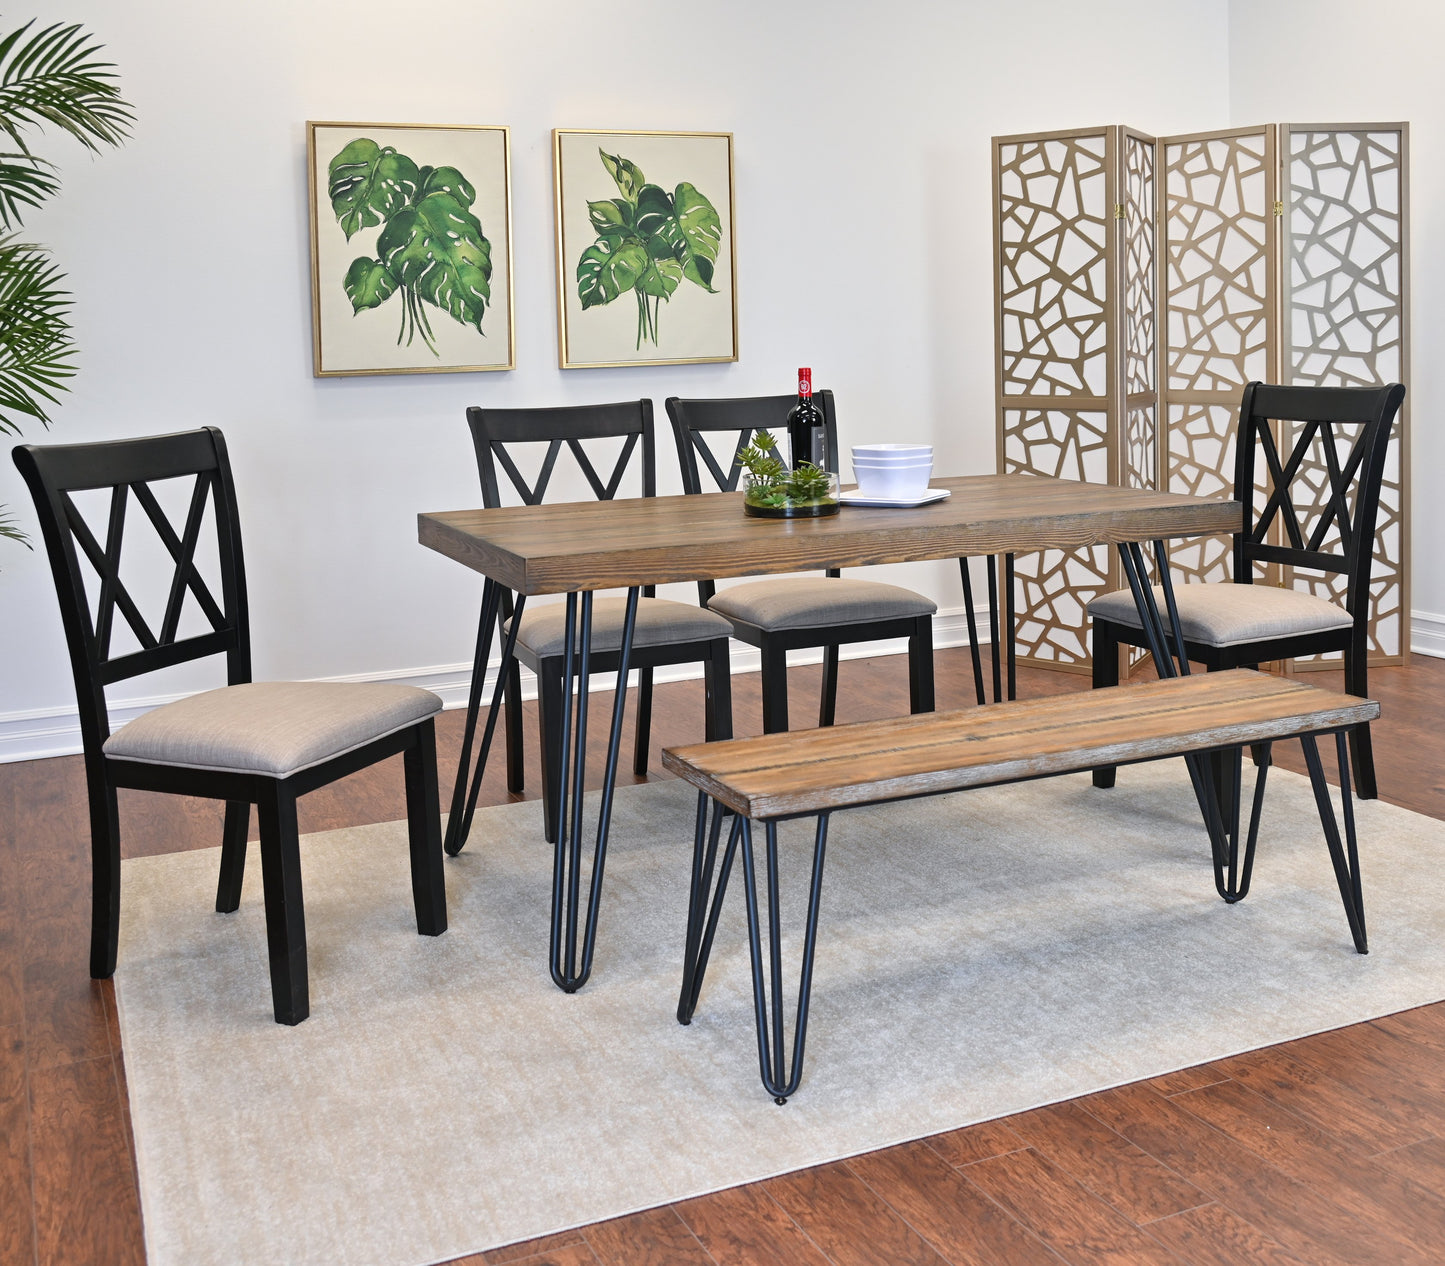 Arroyo 6-Piece Dining Set, Hairpin Dining Table with 4 Cross-back Chairs and Bench, Rich Black